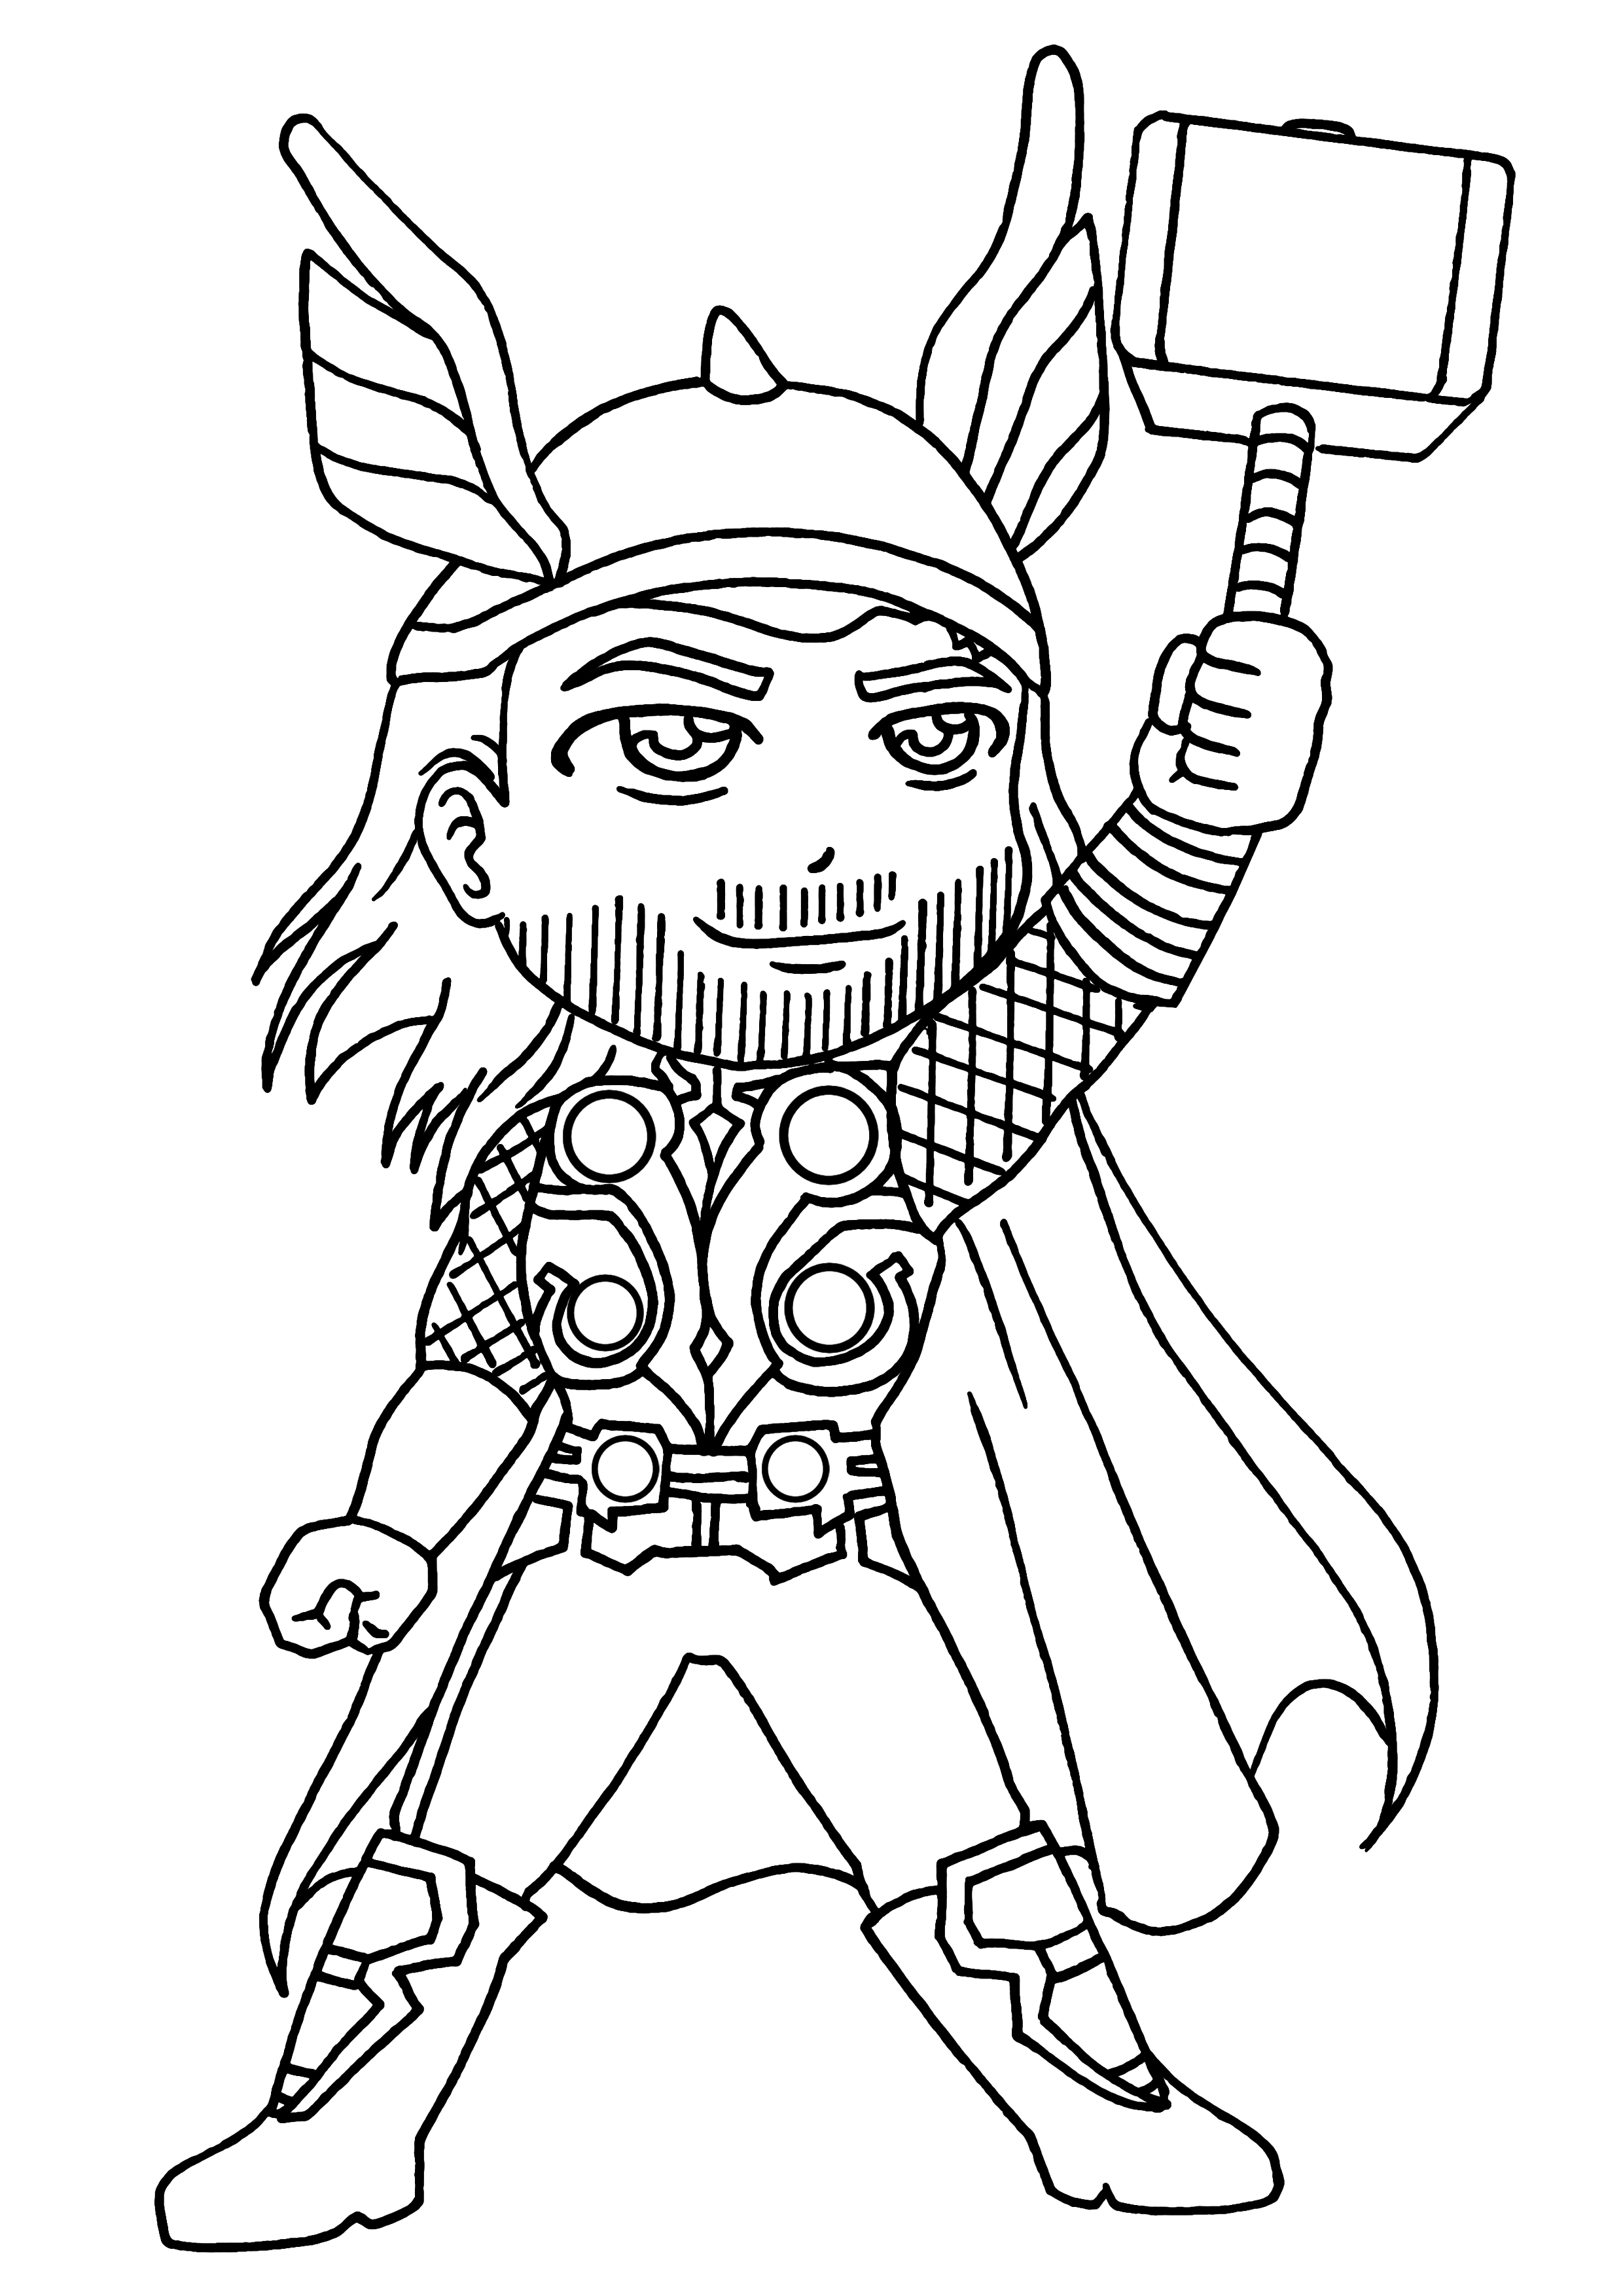 Coloring page thor superheroes â printable coloring pages